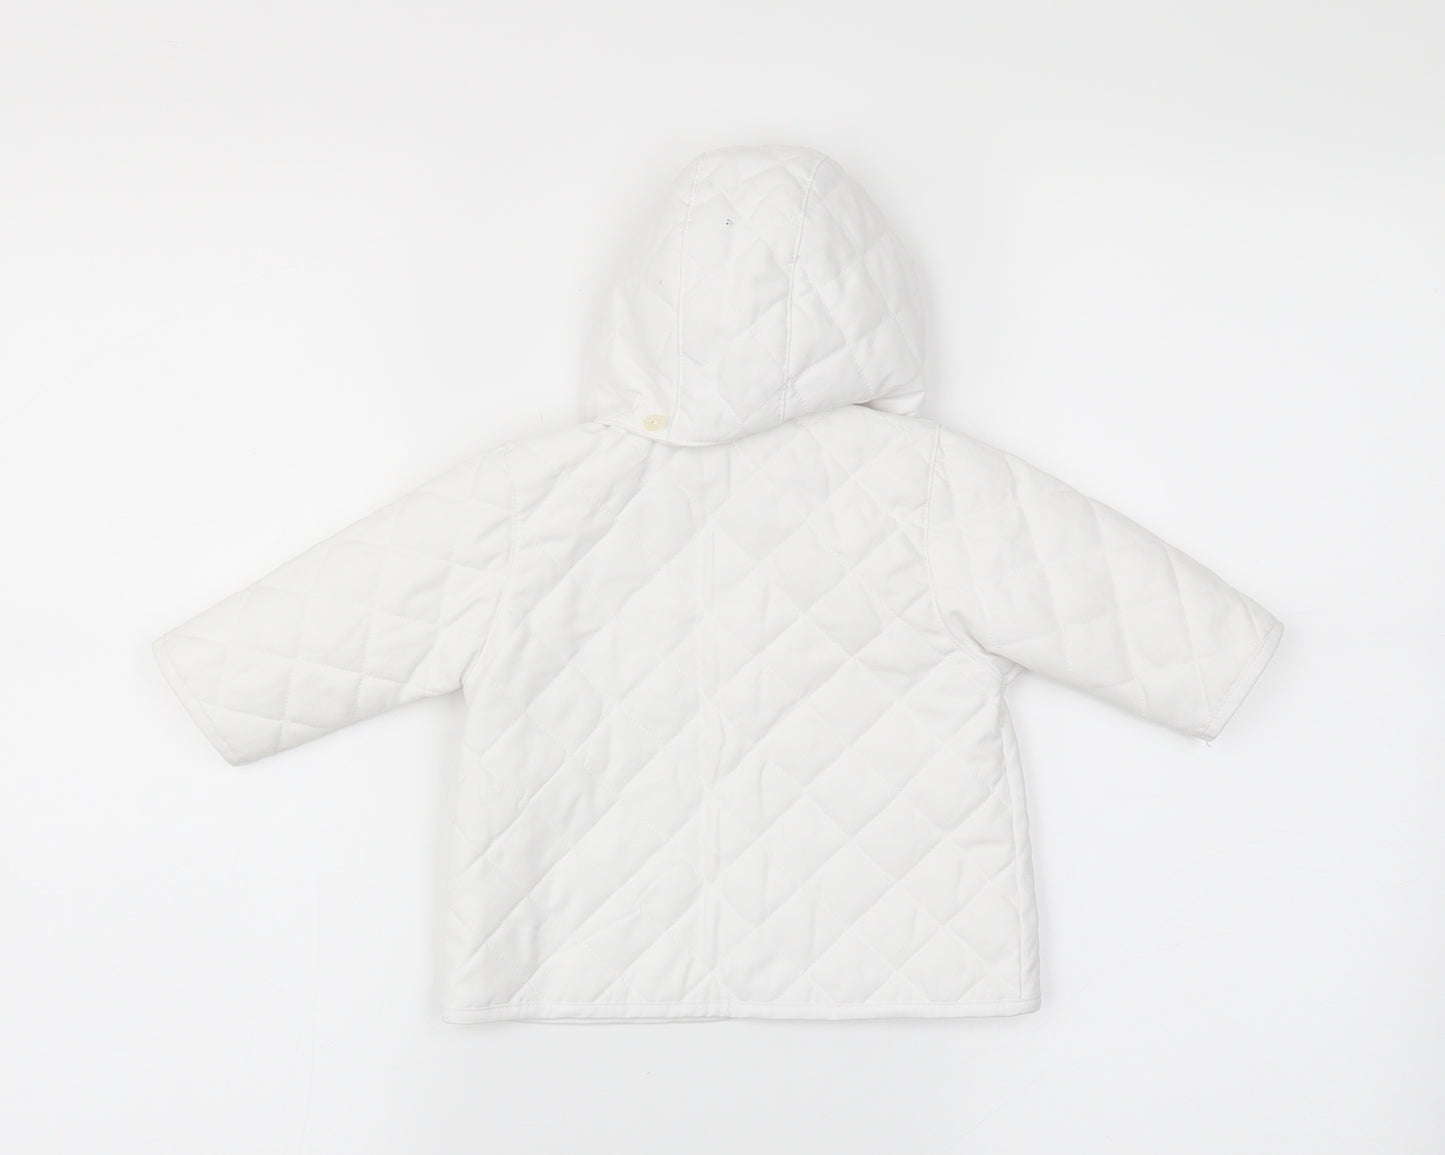 Emile et Rose Girls White   Quilted Coat Size 0-3 Months